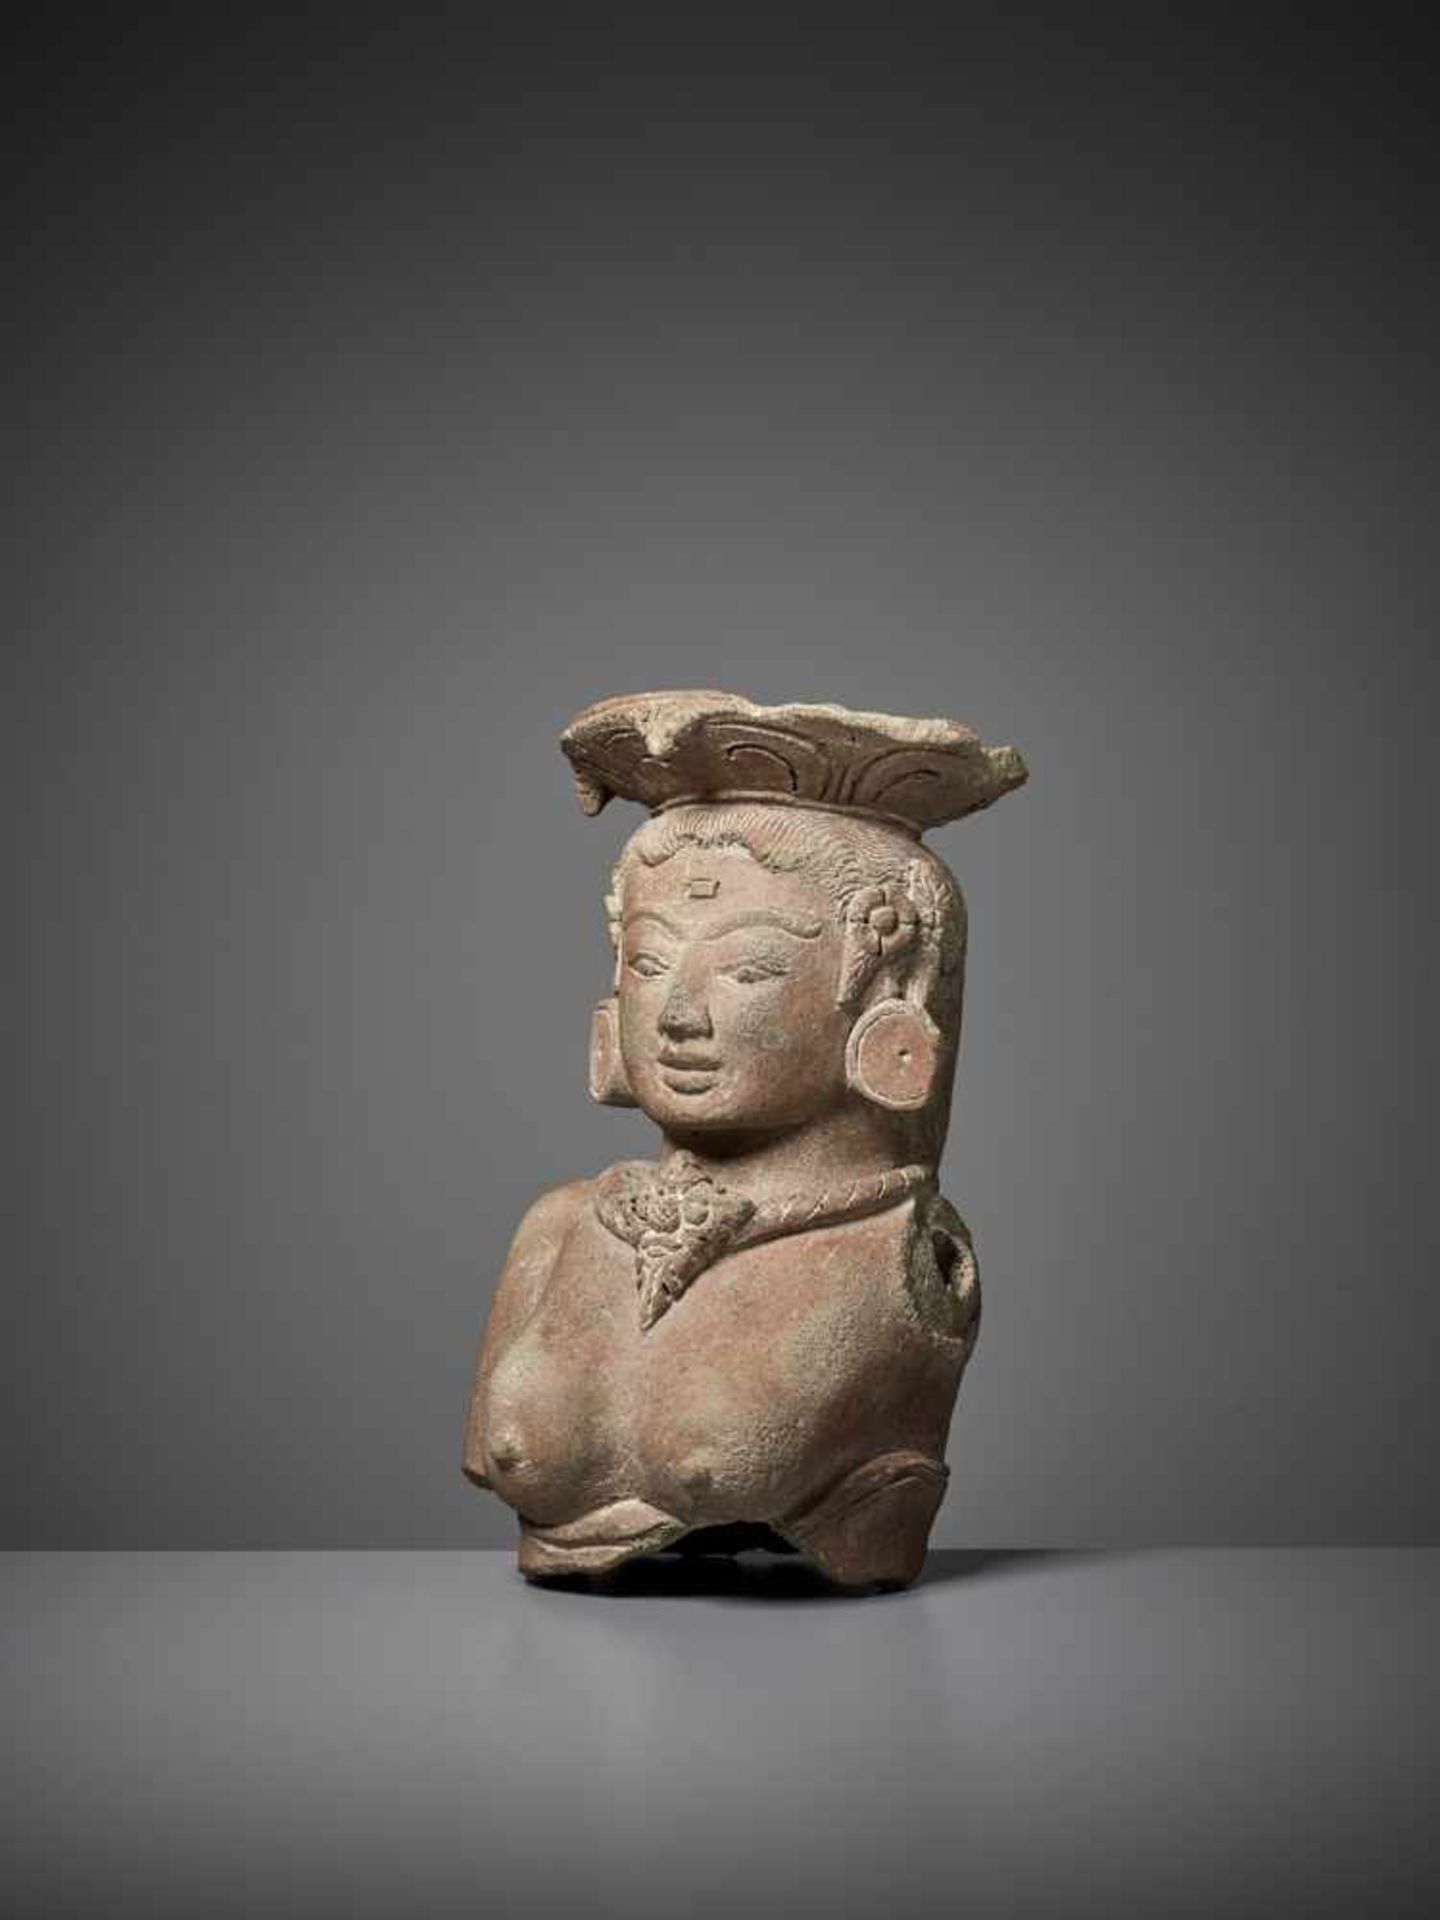 A FEMALE MAJAPAHIT TERRACOTTA BUST Indonesia, Java, 14th – 15th century. This elaborate and - Image 4 of 10